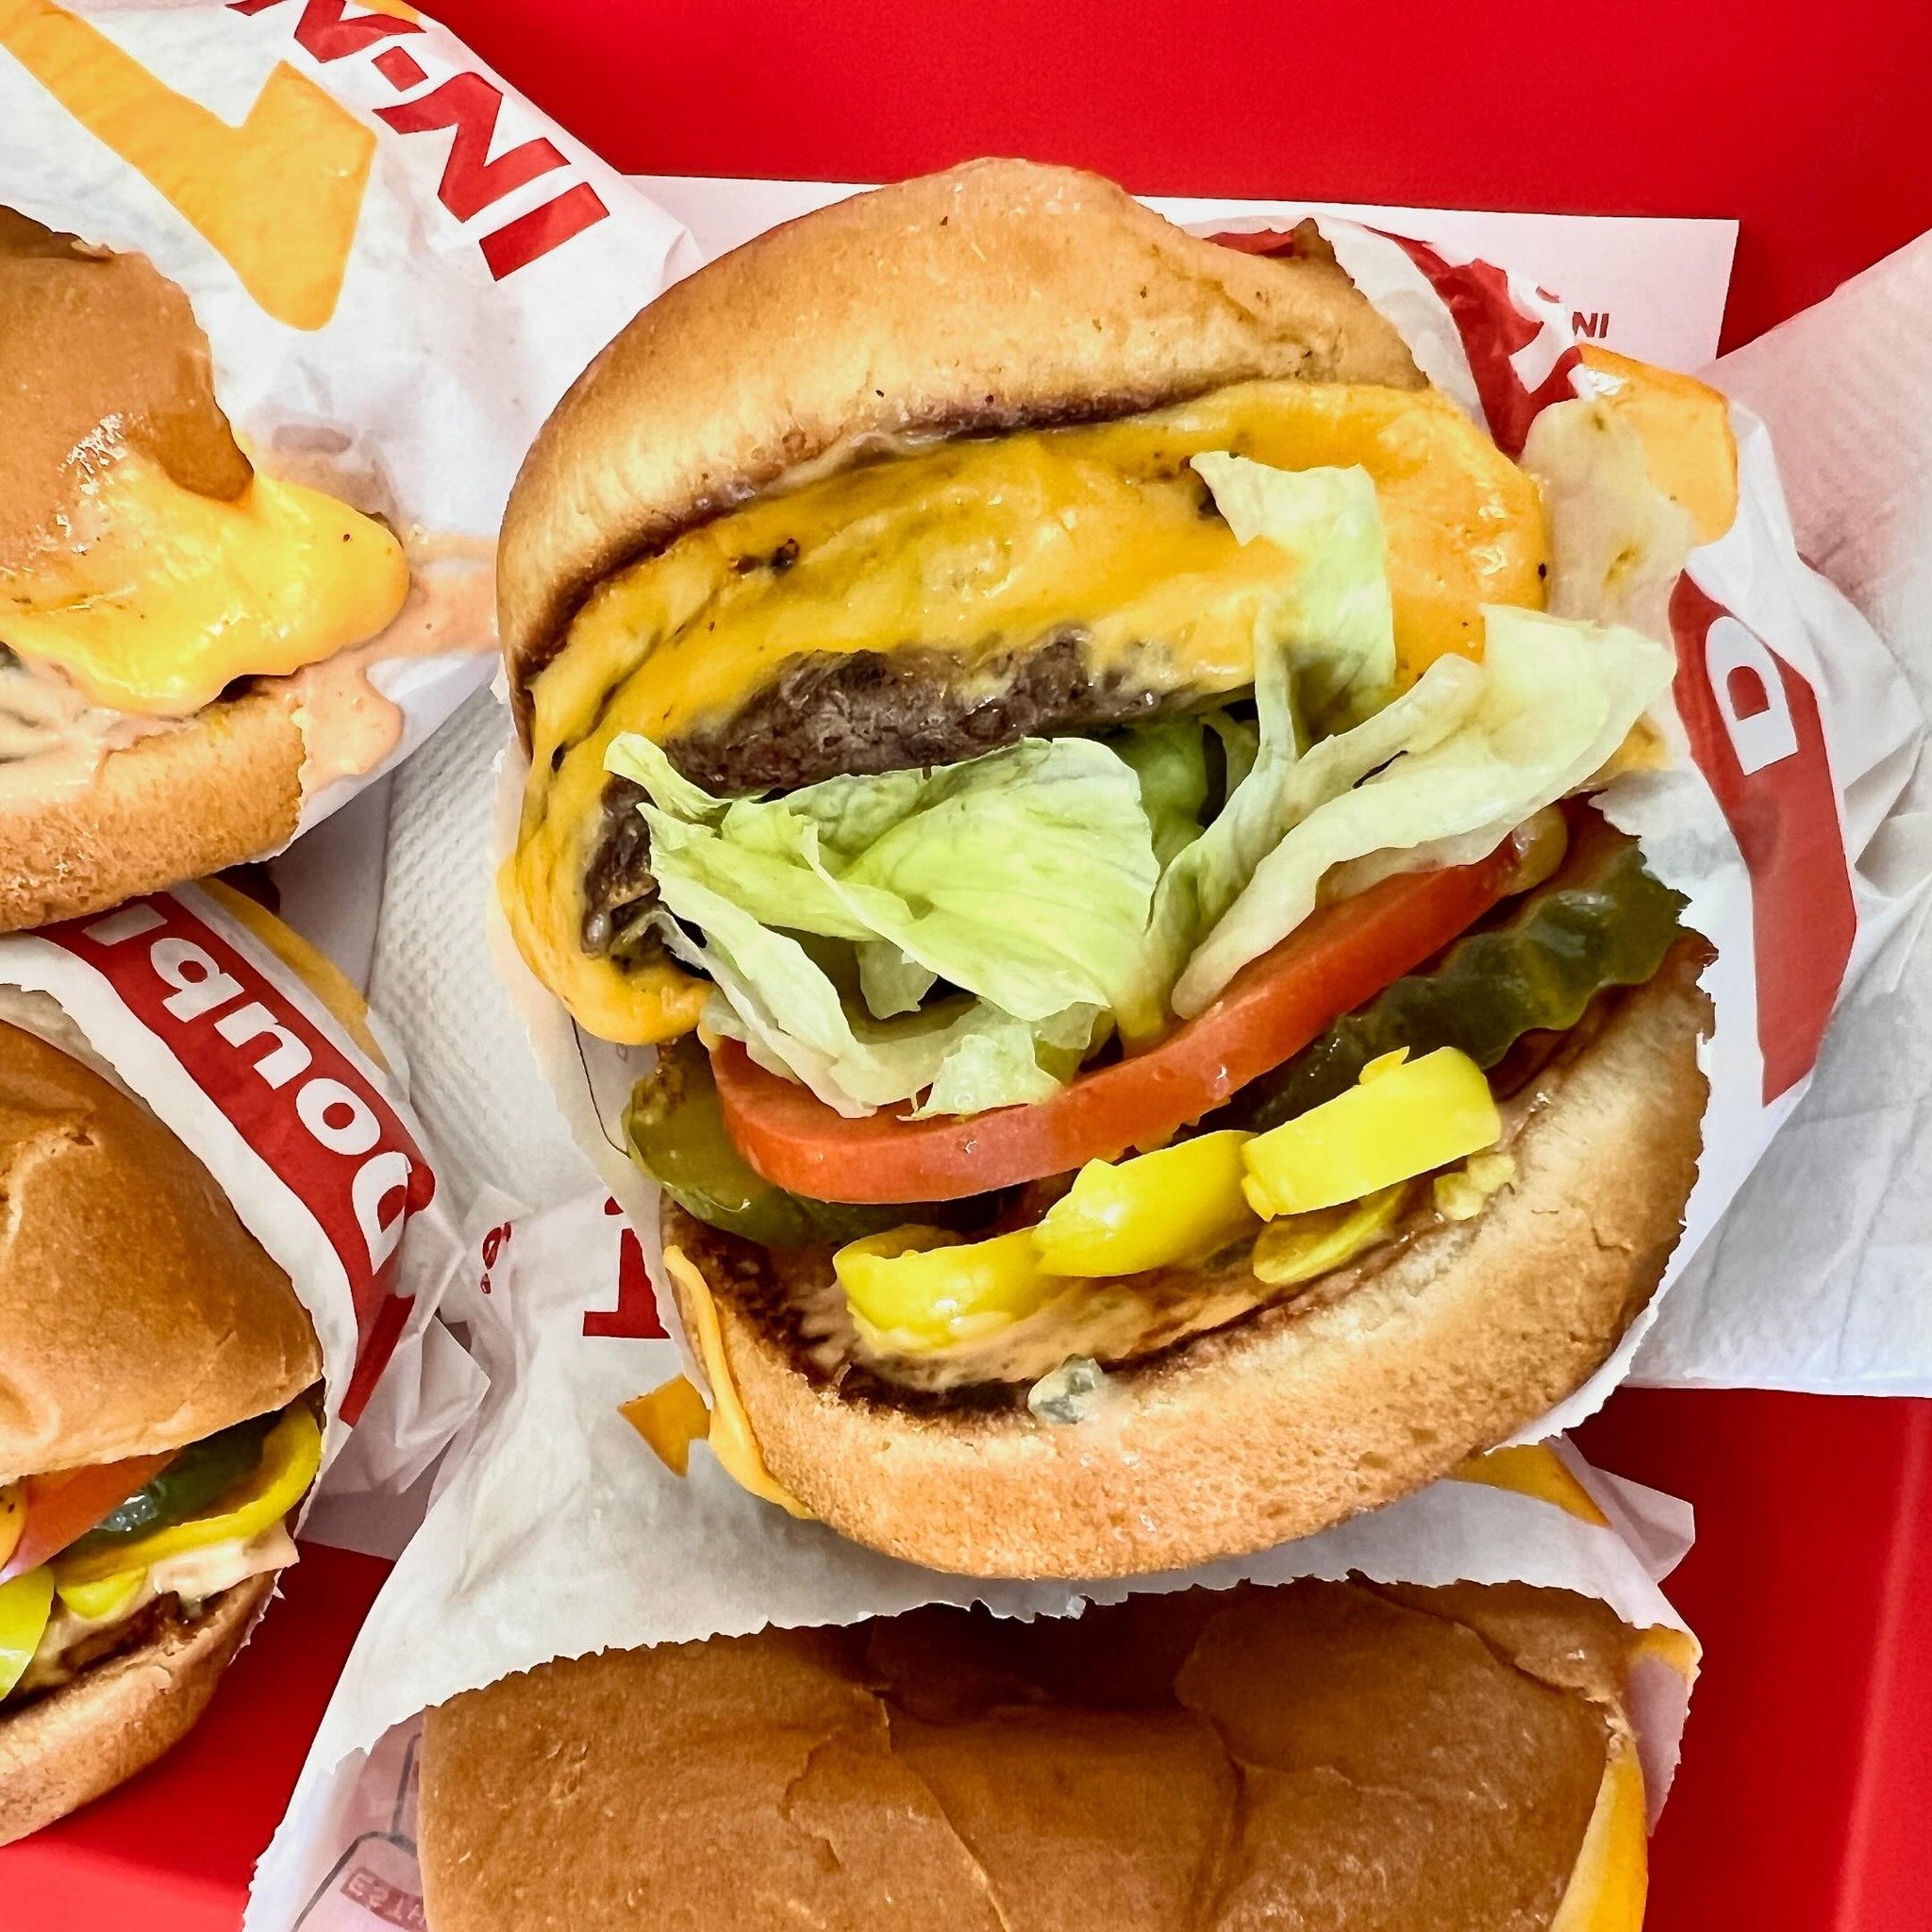 In-N-Out is always the first stop when I get off the plane in Cali, so I can enjoy a Double Double Animal Style with hot peppers (and a side of fries, which always suck, but I live with the hope that someday they will revamp them). 

What&rsquo;s you